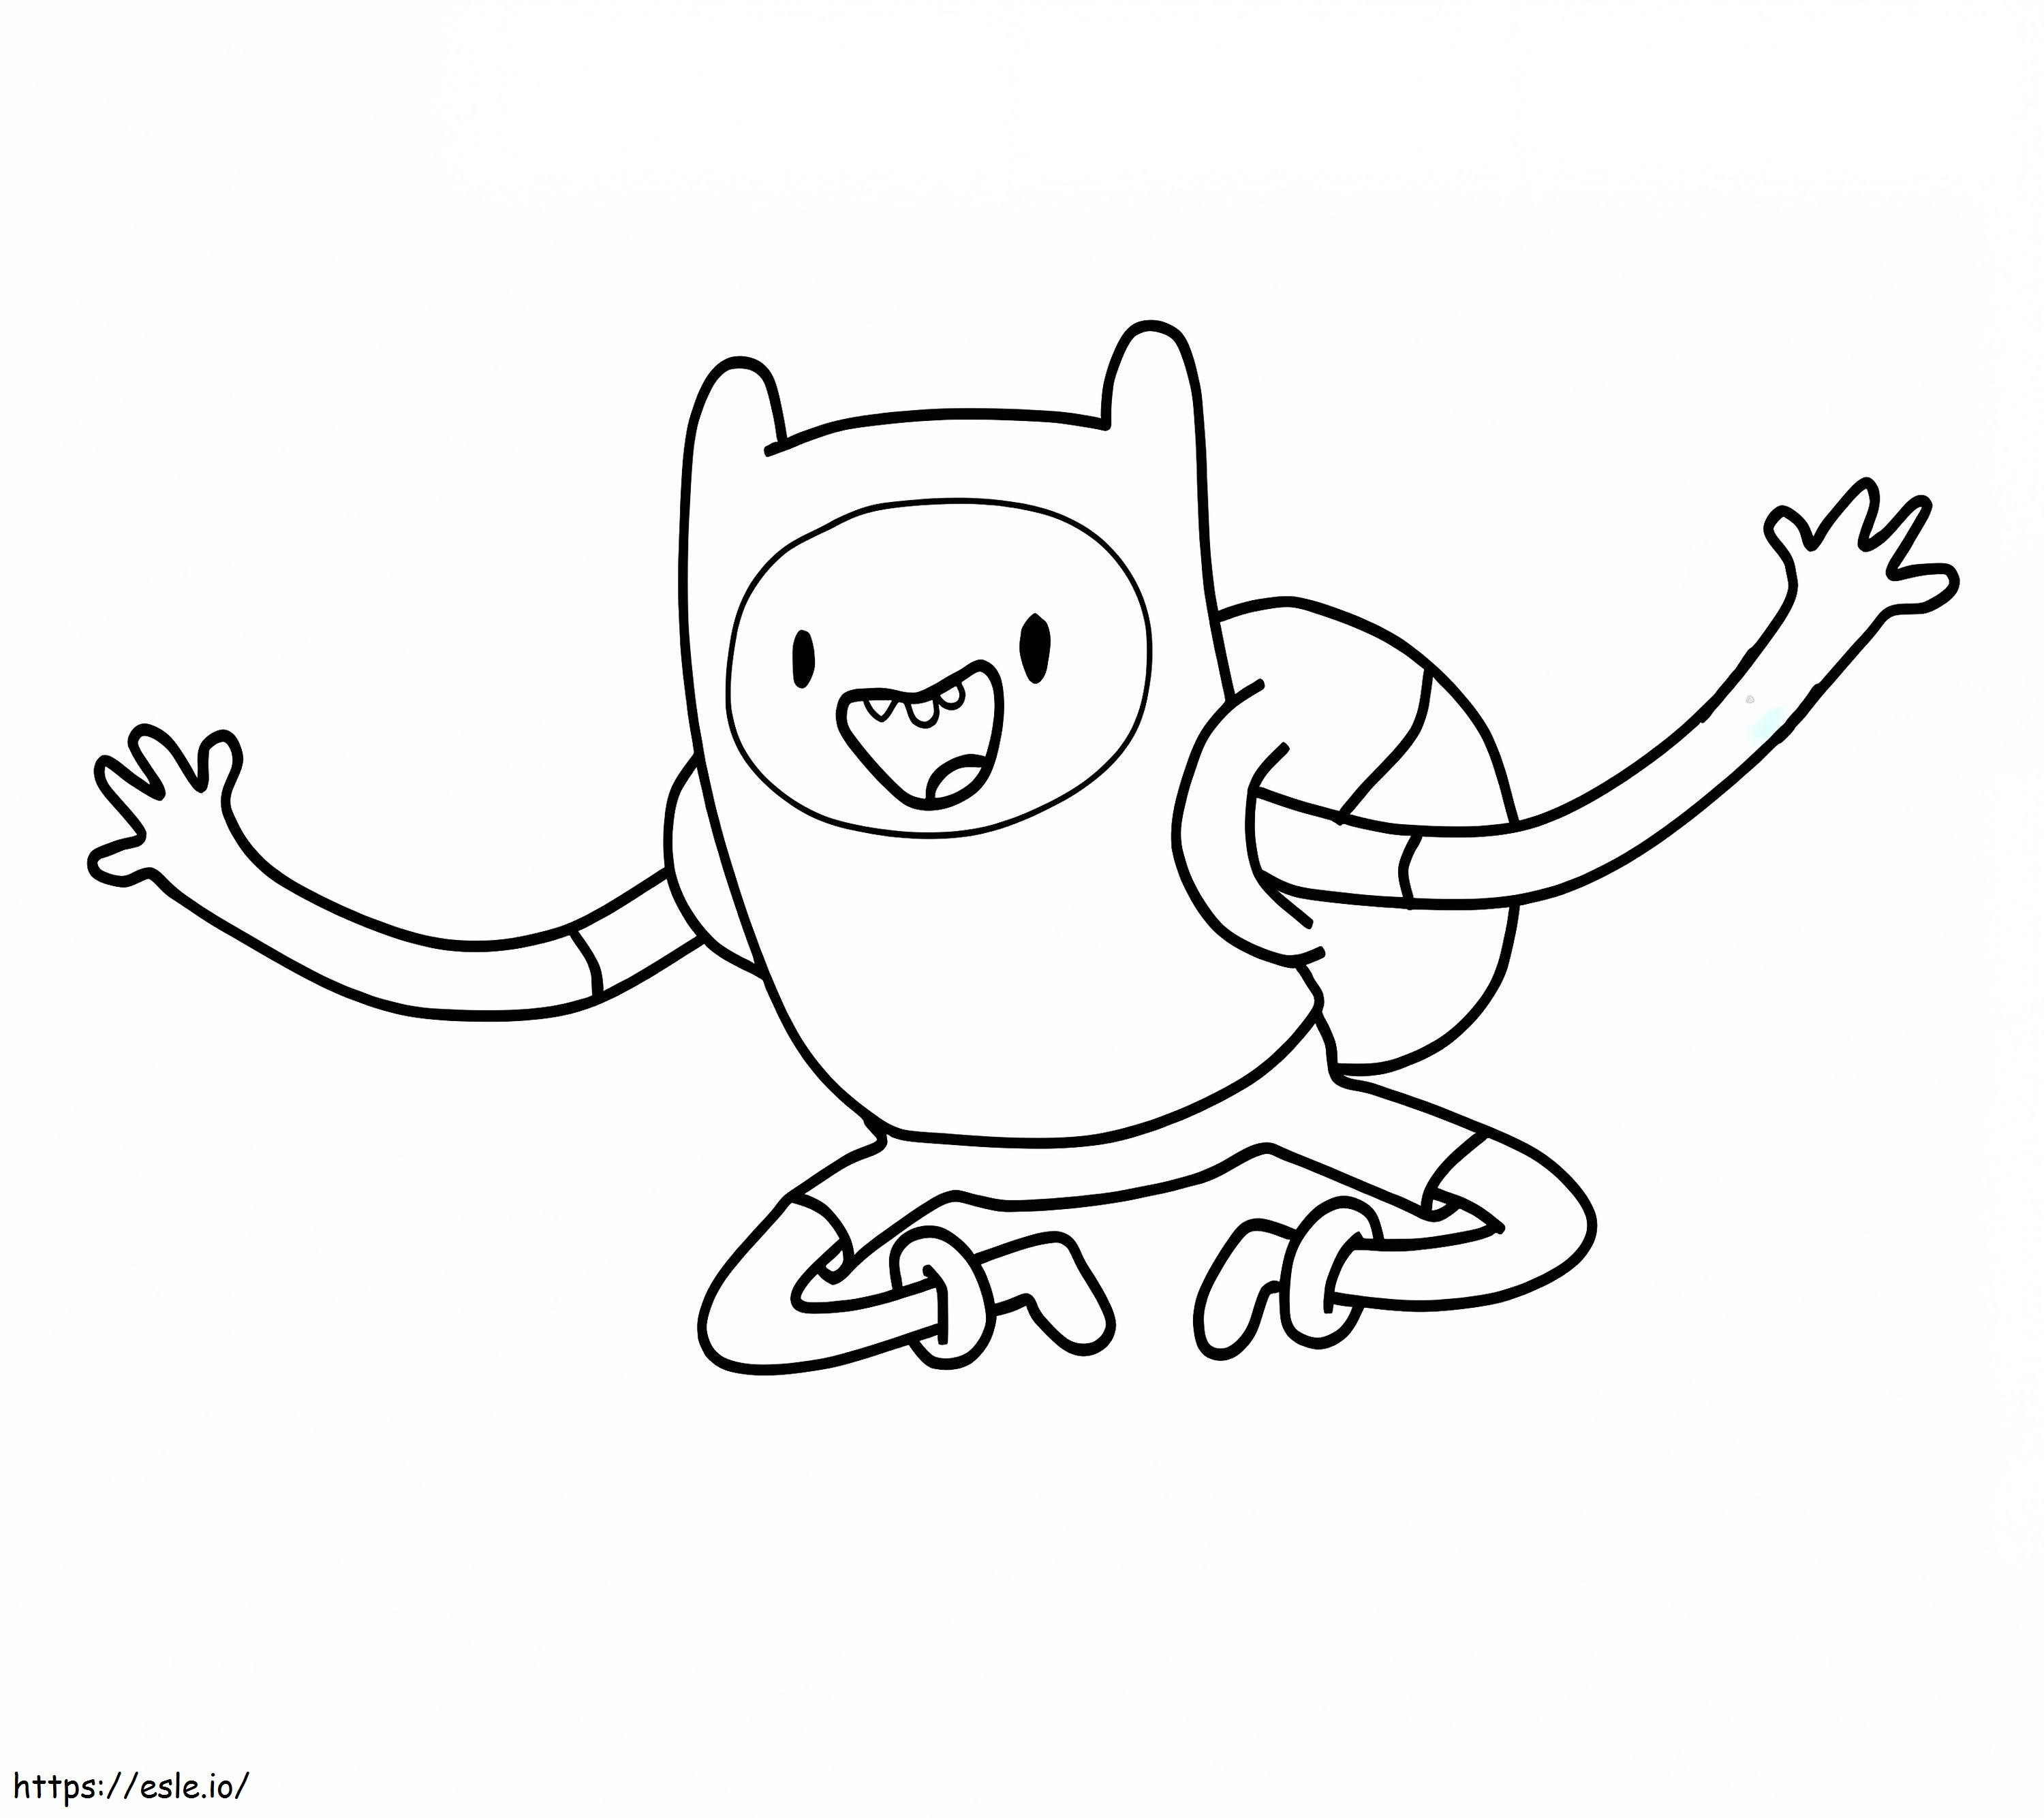 Finn Smiling coloring page